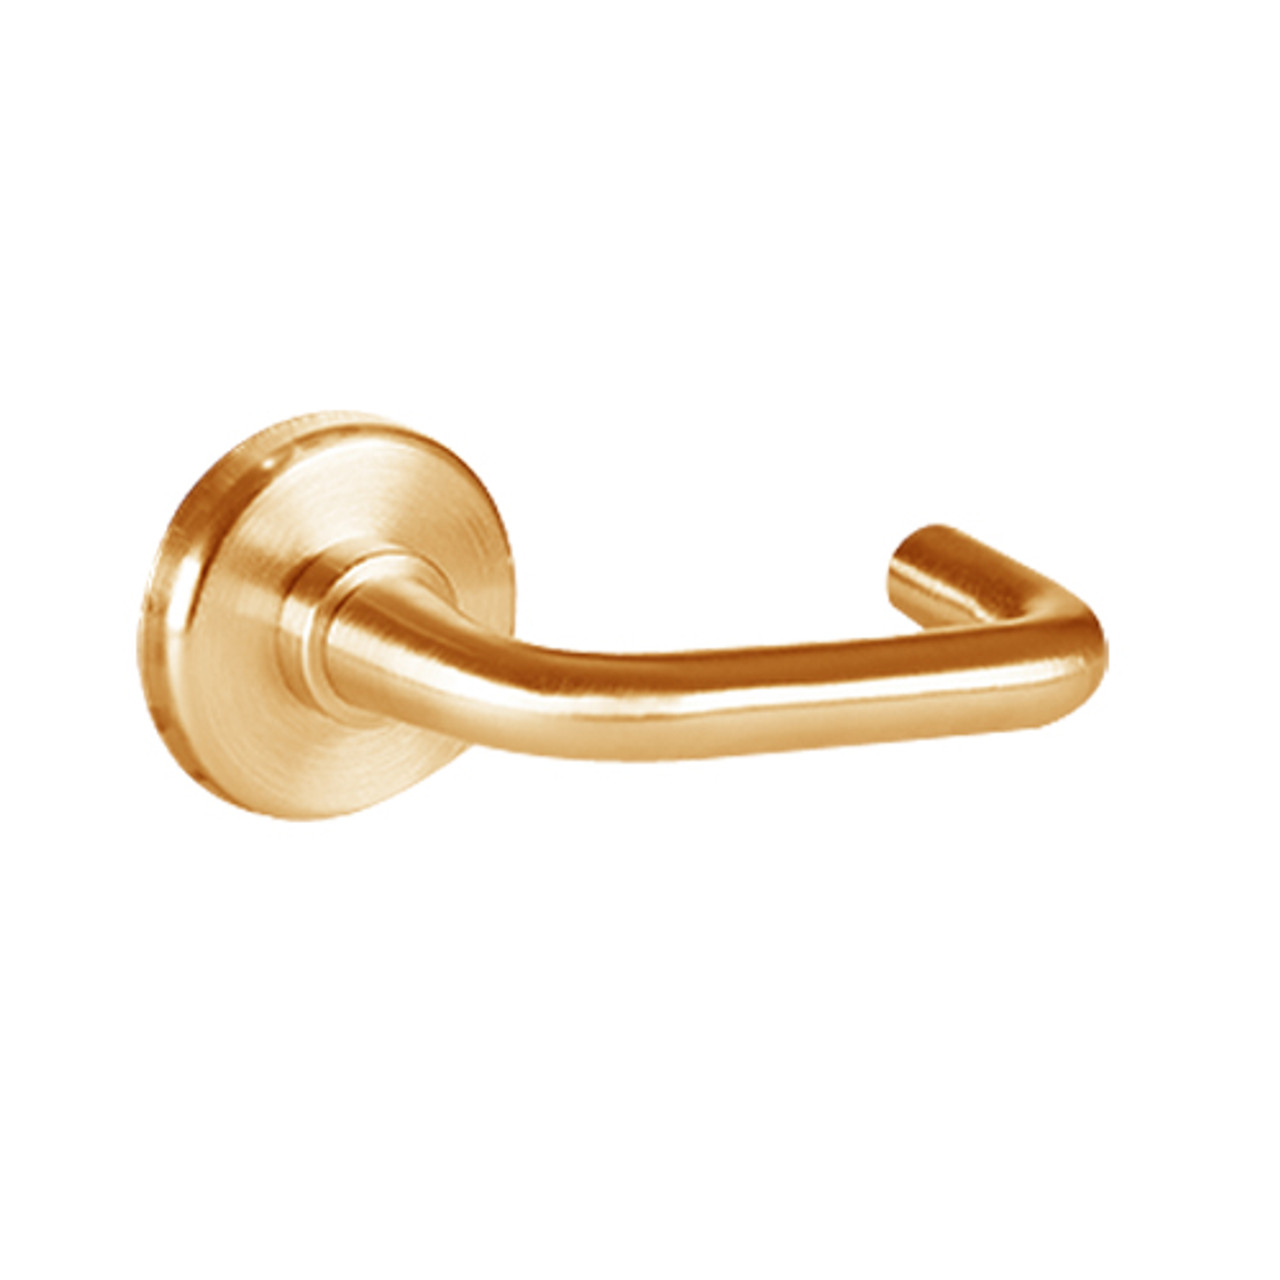 40HTKIS13S612 Best 40H Series Trim Kits Inside Lever Only with Solid Tube-Return Trim Style in Satin Bronze